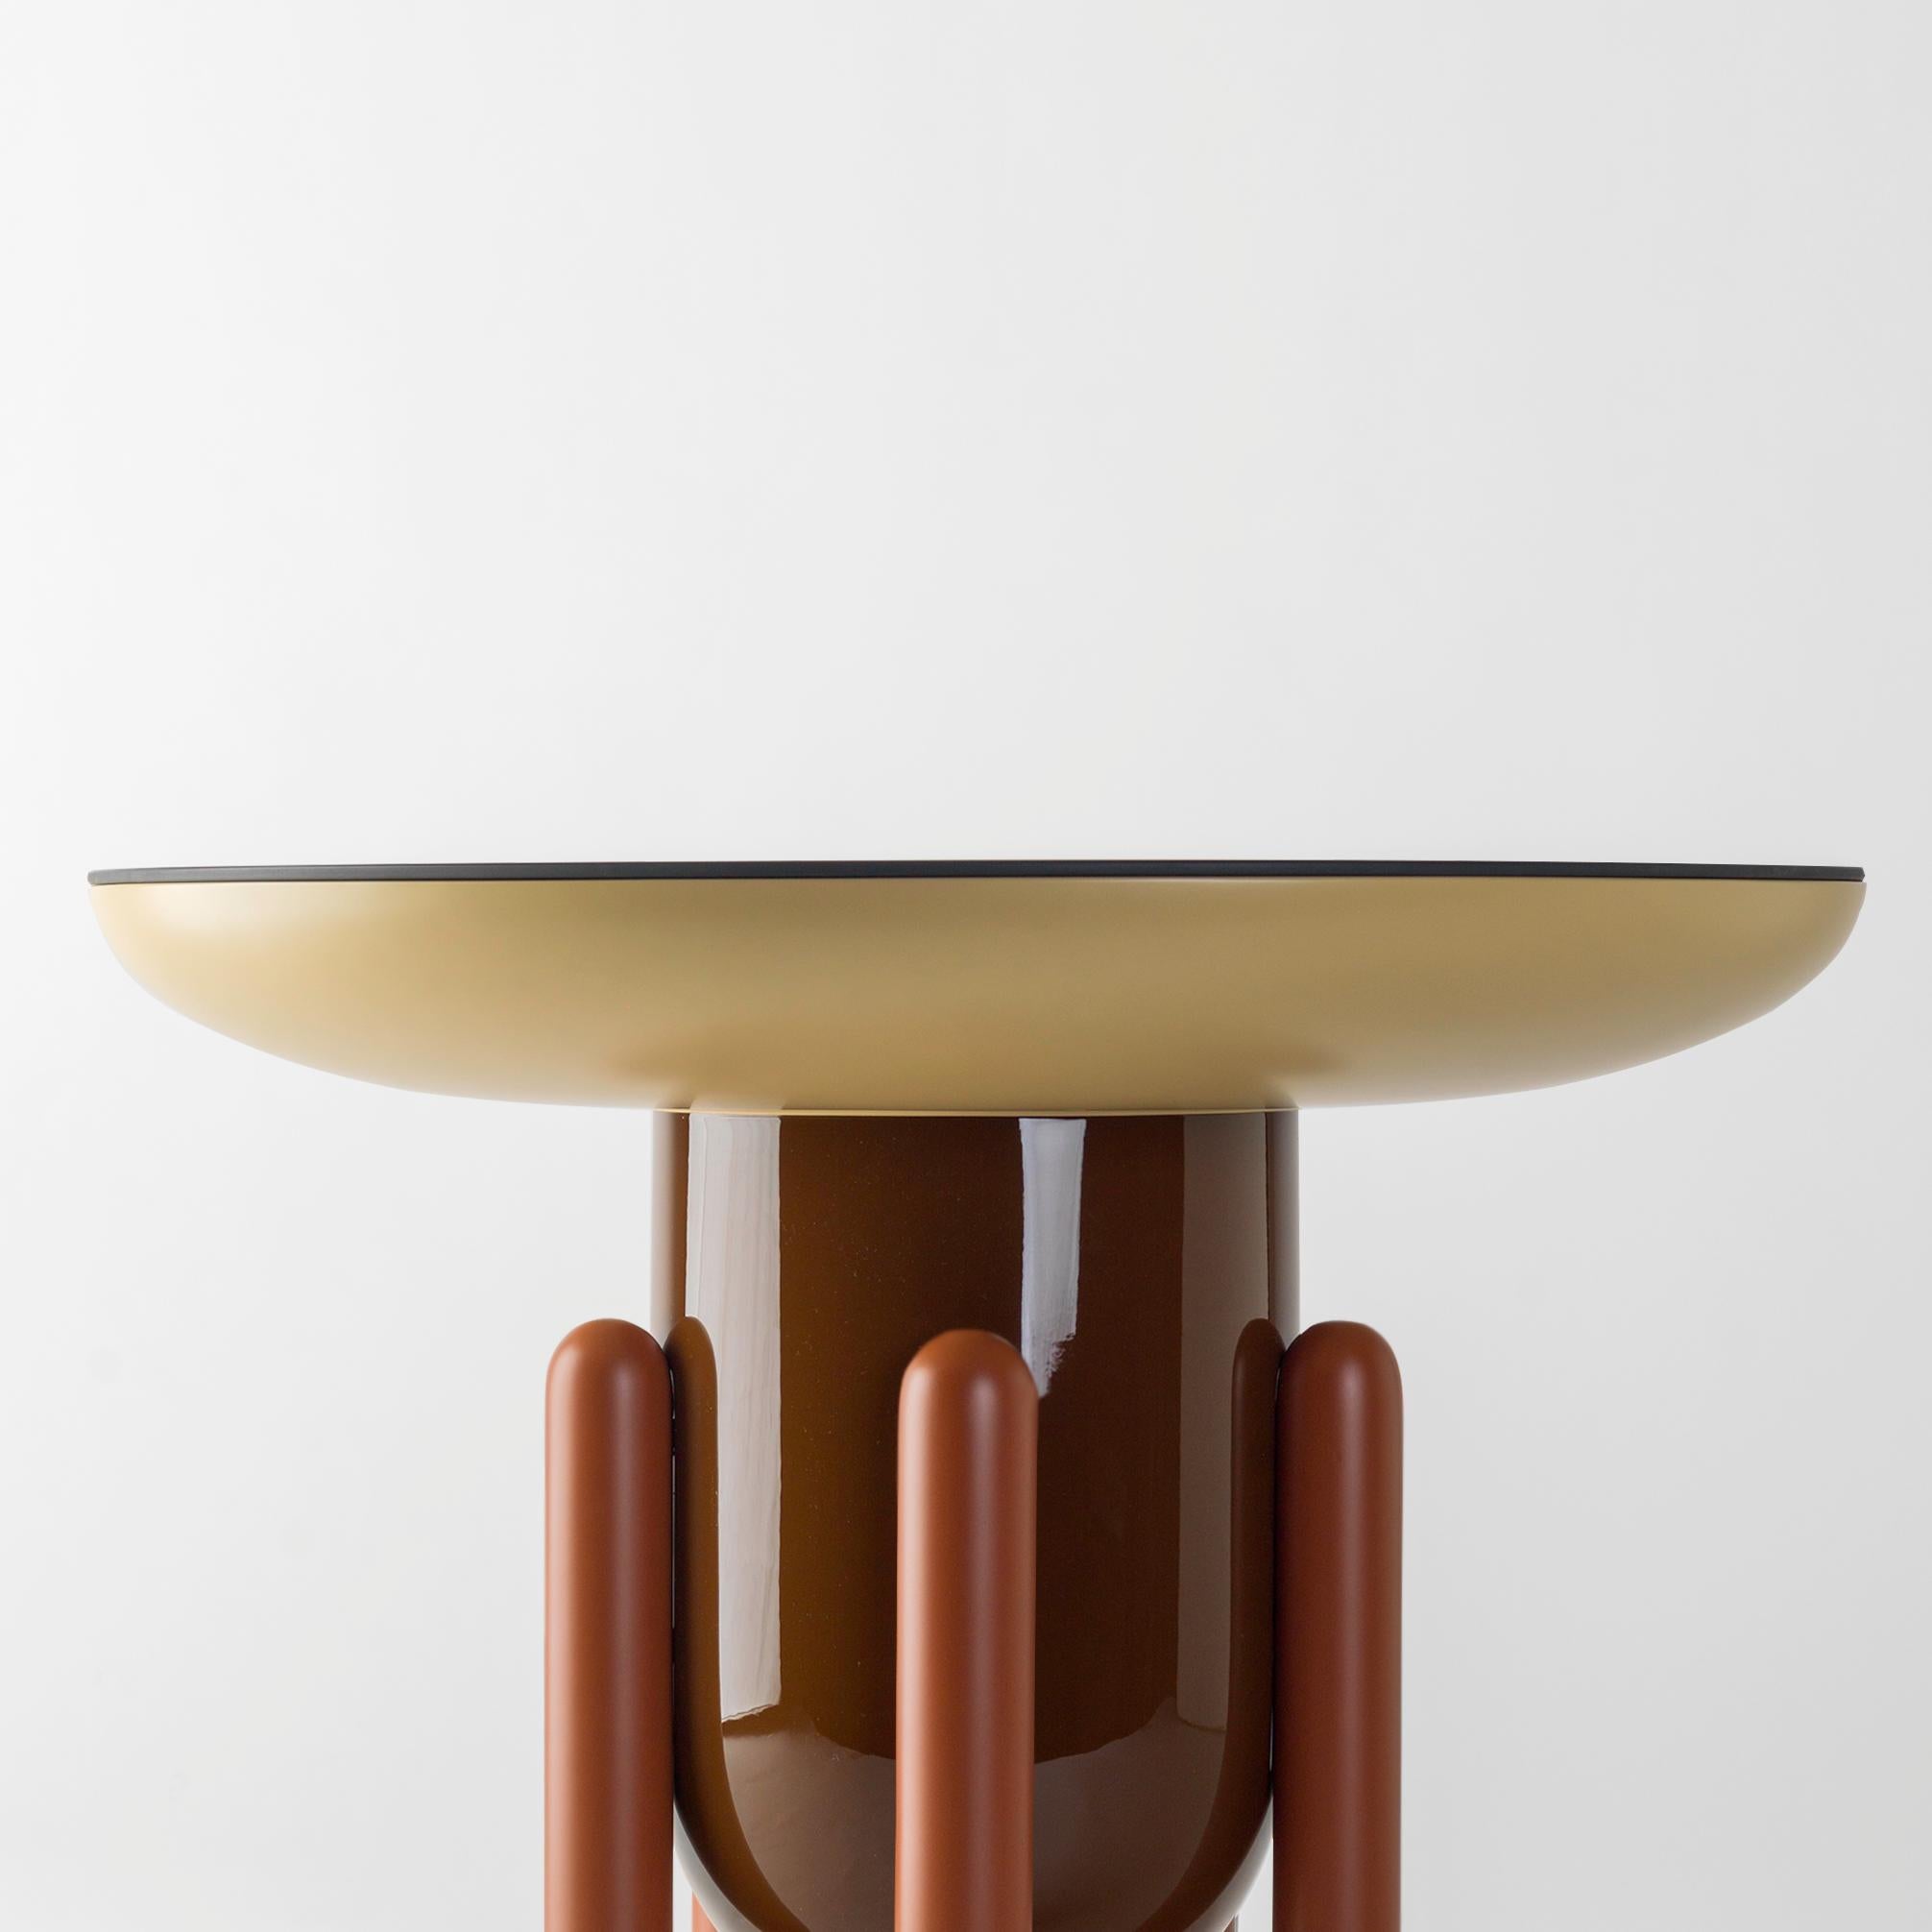 Multi-color explorer #02 table

Design by Jaime Hayon, 2019
Manufactured by BD Barcelona.

Lacquered fiberglass body. Solid turned wooden legs and lacquered. Painted glass tabletop.

Measure: 60 Ø x 46 cm

- Glass: RAL 7021
- Top: RAL 1001